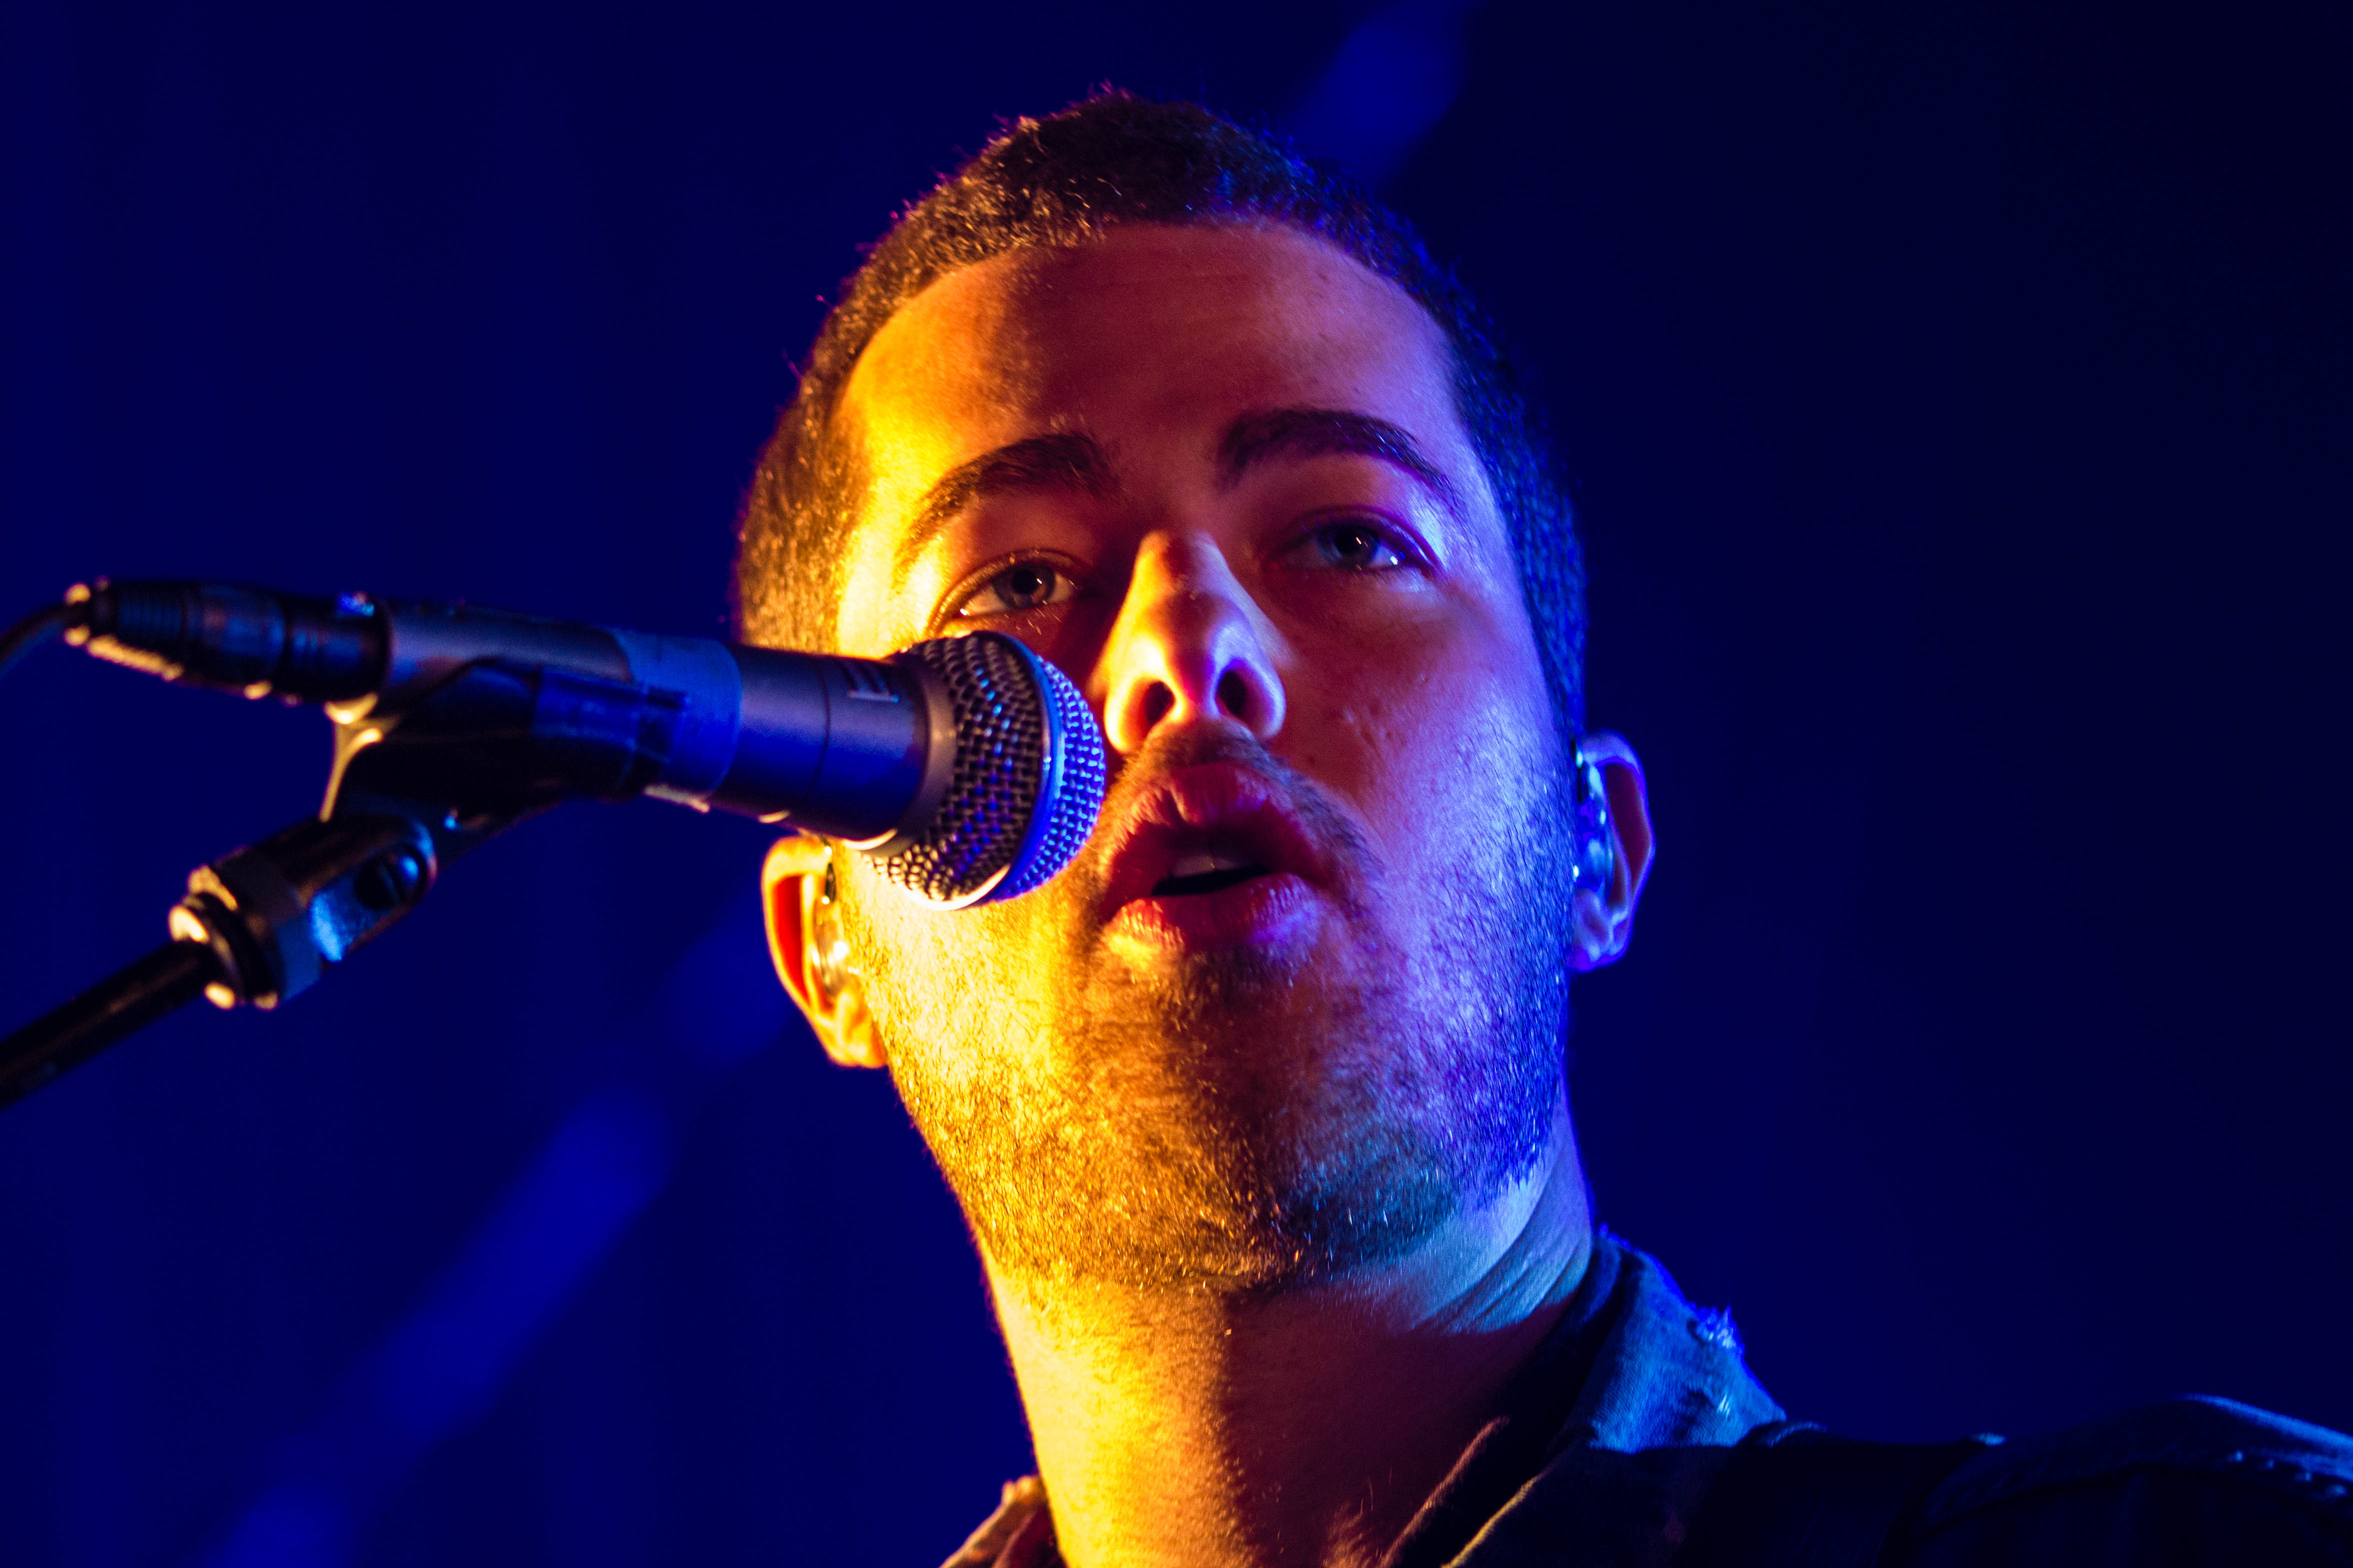 Ryan Hahn - Local Natives (House of Blues - Dallas, TX) // Photo by Crystal Prather